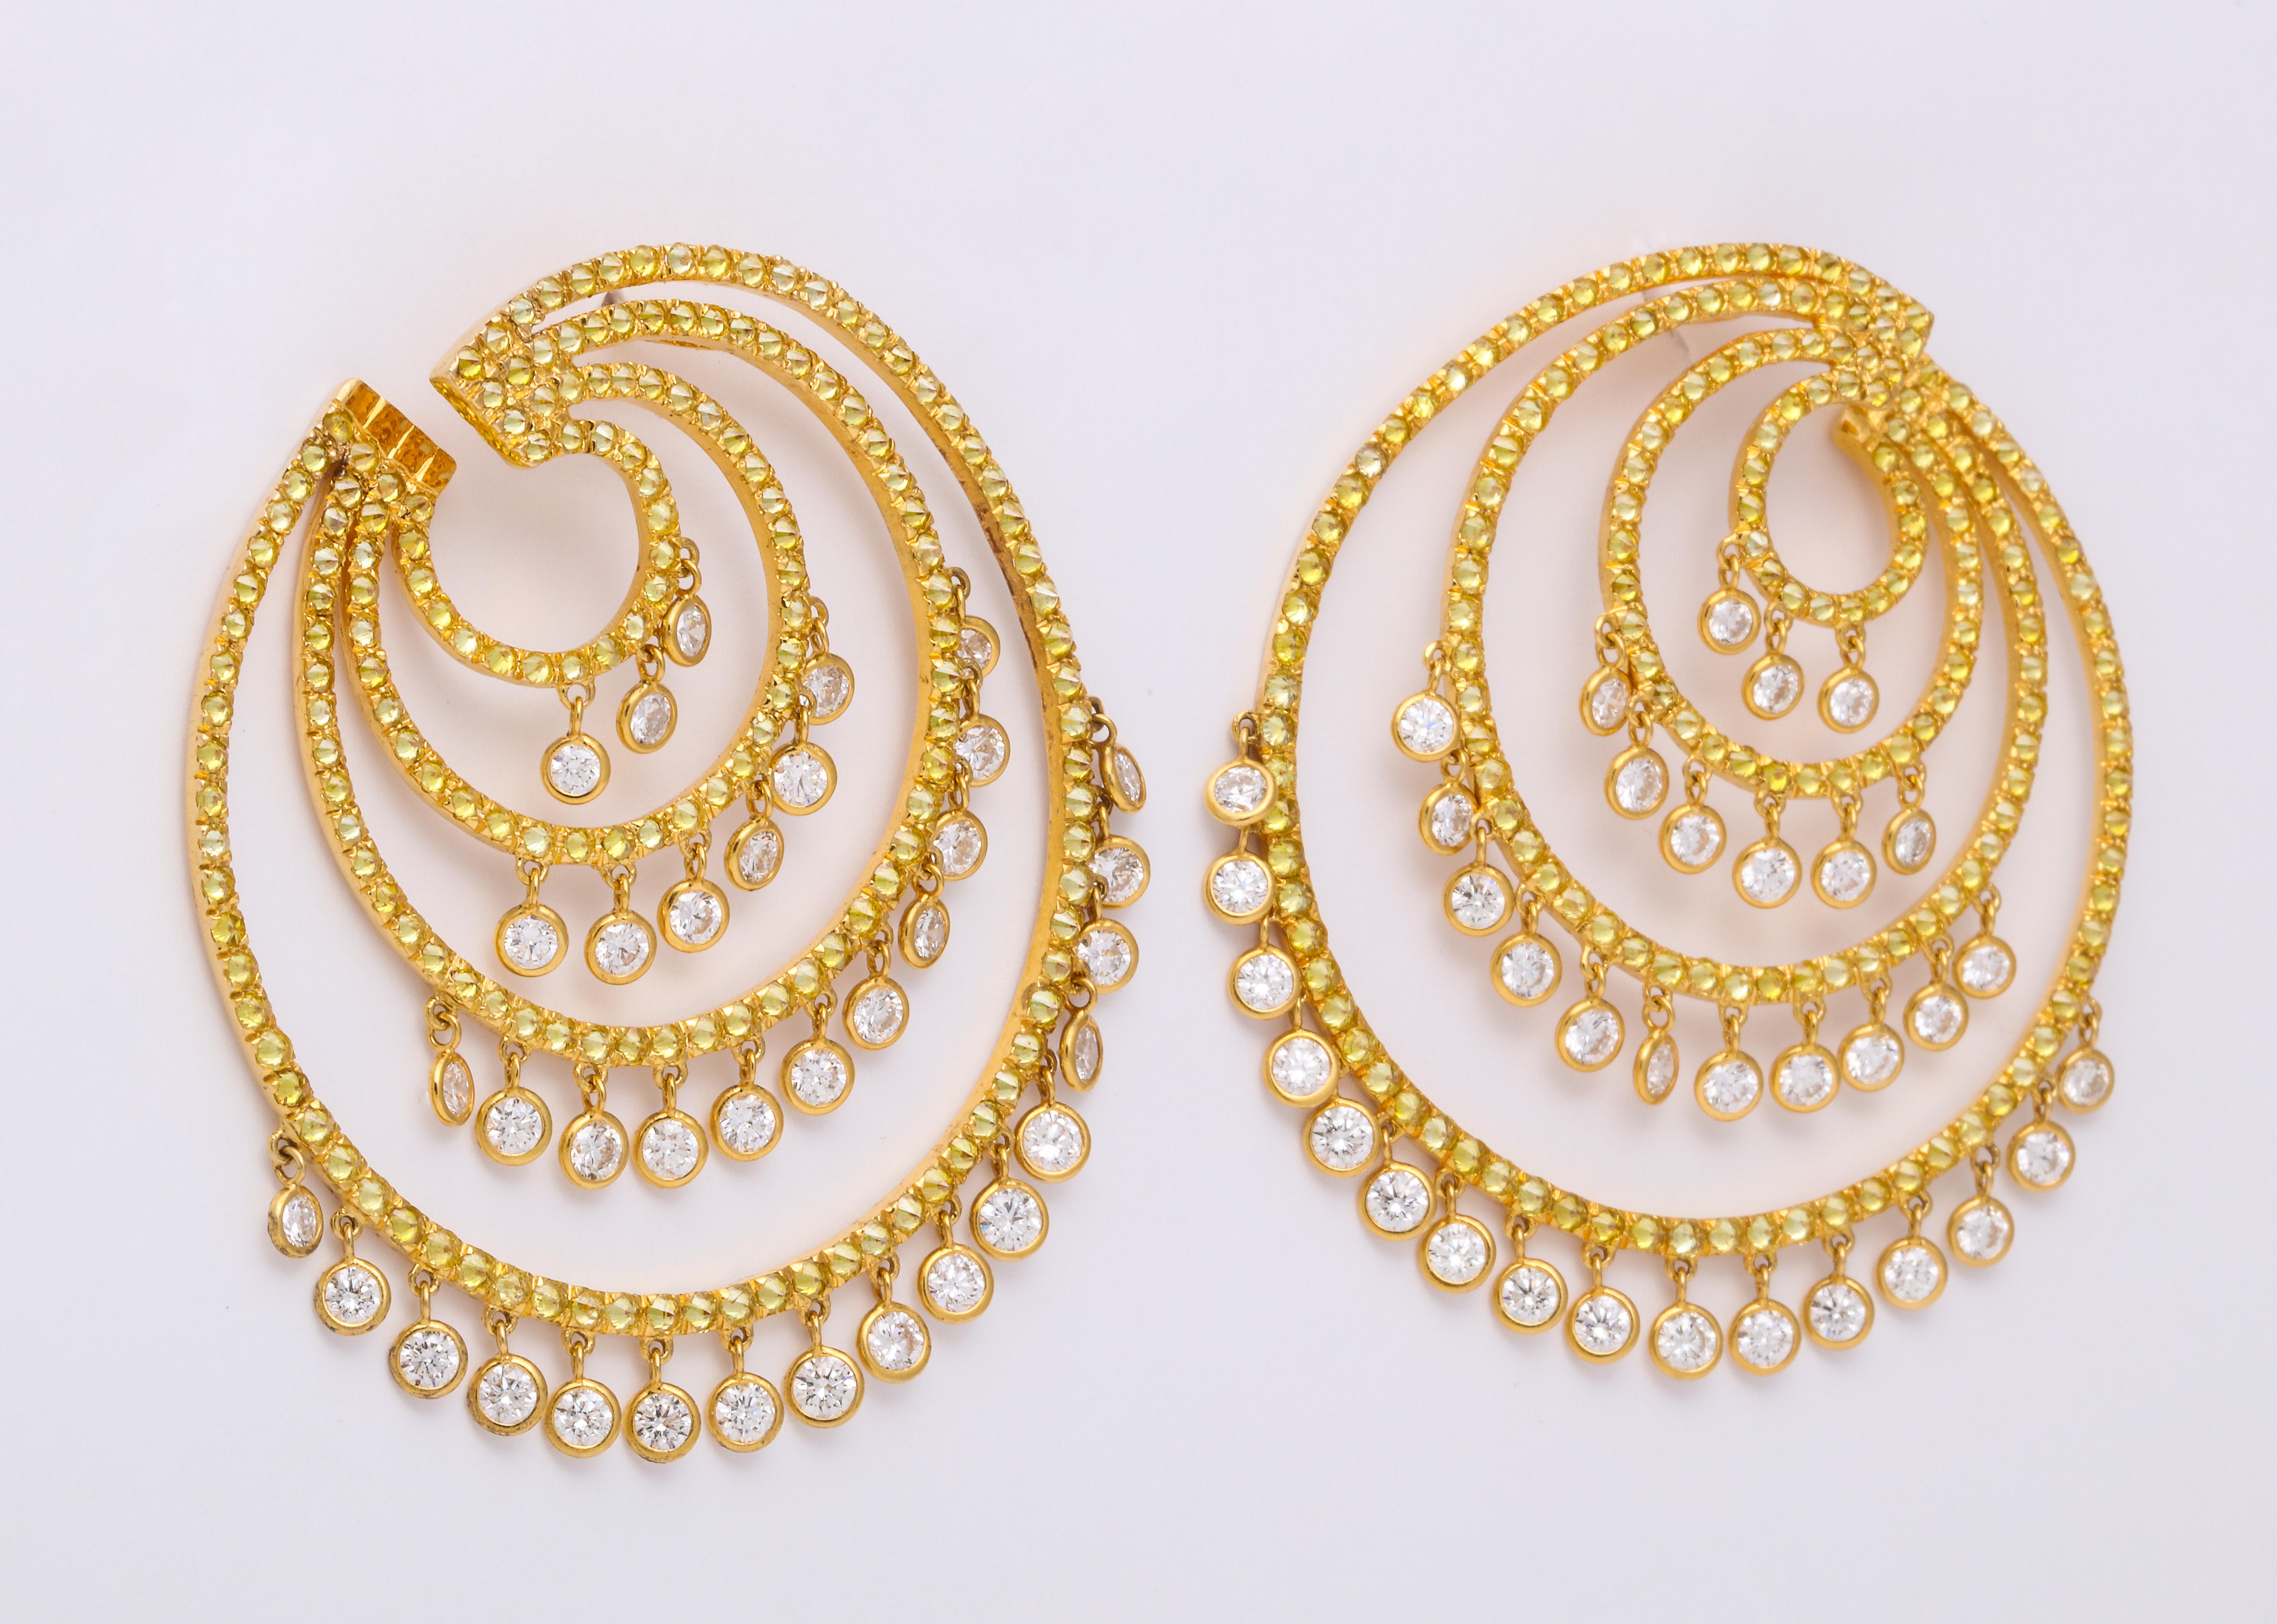 Light and airy 18K yellow gold quadruple C-Scroll earrings decorated with pave'-set inverted round brilliant-cut natural color diamonds: 6.82 carats, suspending 4 tiers of articulating, collet-set round brilliant-cut colorless diamonds: 6.25 carats.